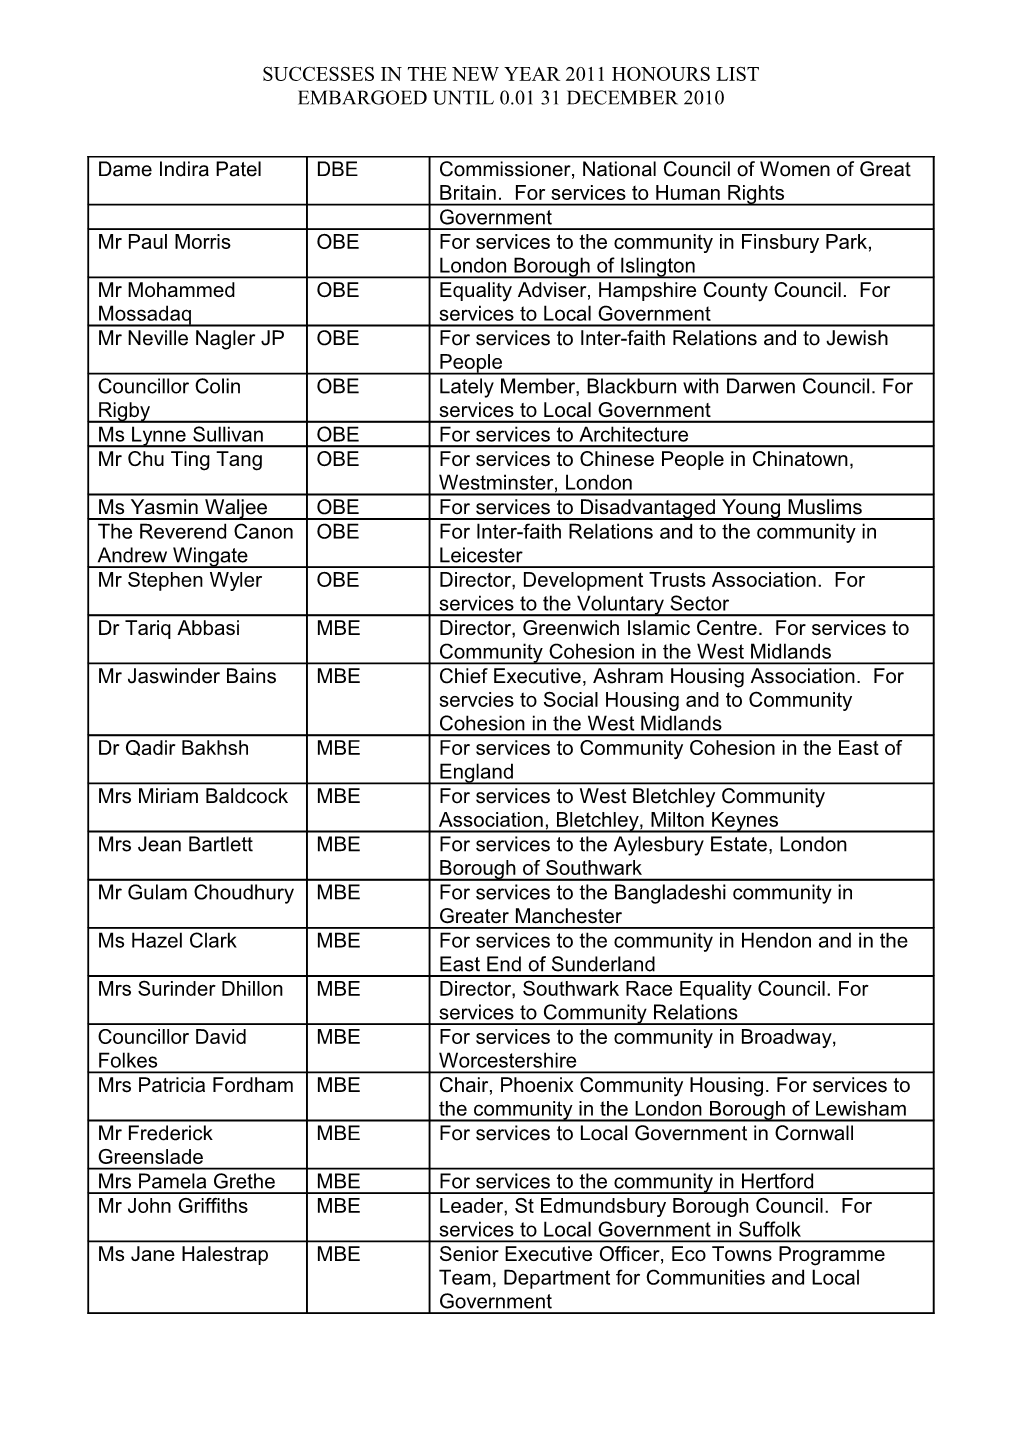 Successes in the New Year 2011 Honours List